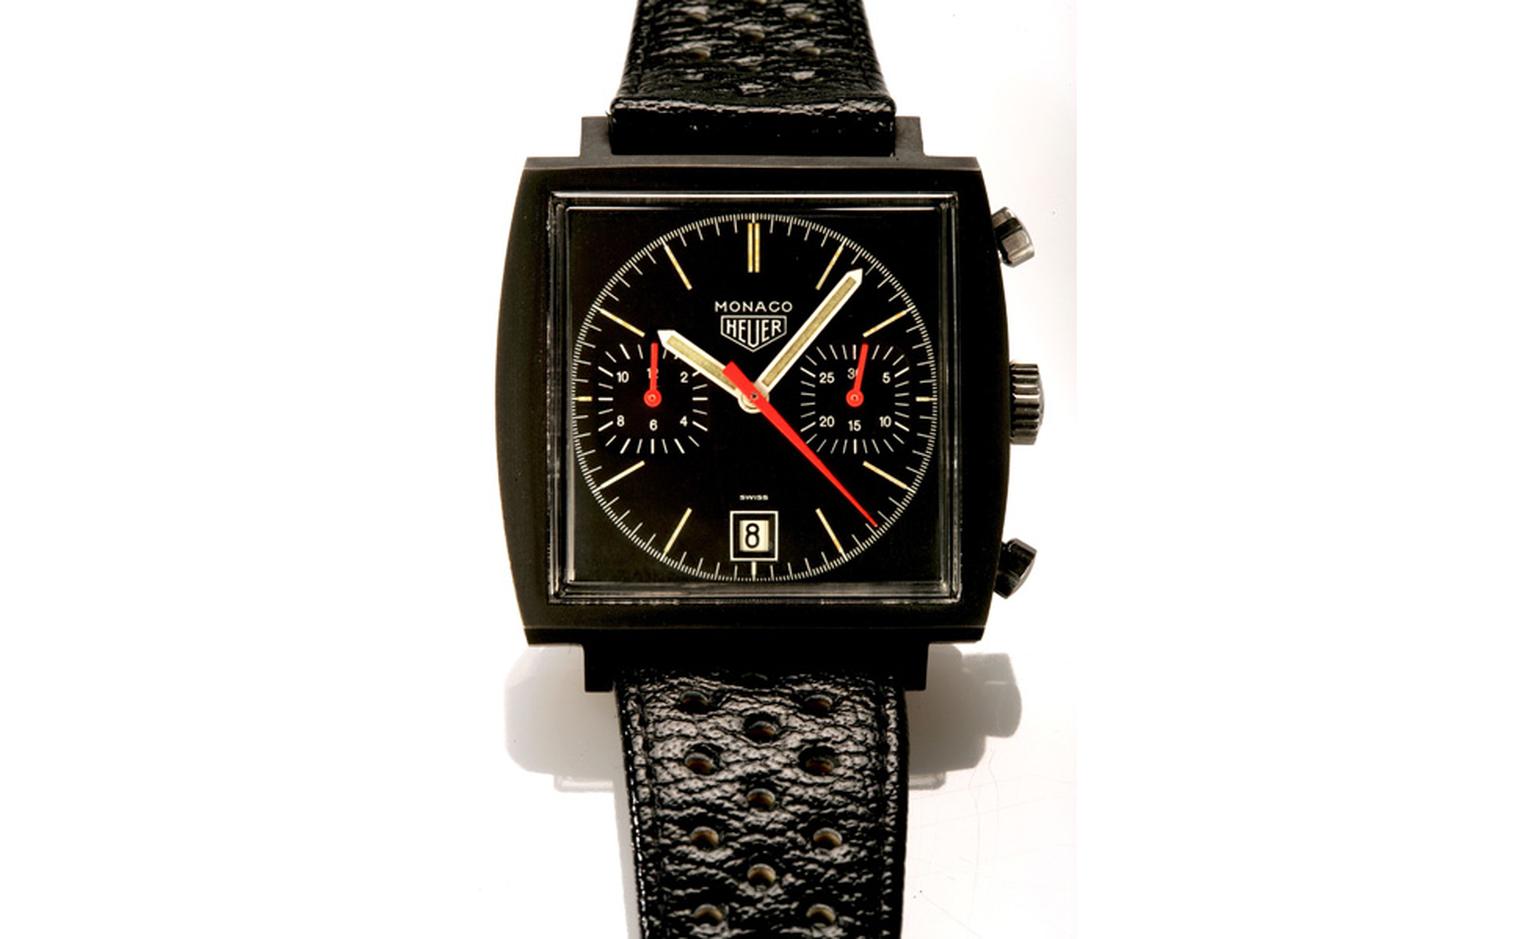 Bonham's Lot 98 was the highest price achieved at the auction. The rare 1974 Heuer Monaco with a black PVD coating sold for £48,000 though estimate was between £10,000 and £15,000